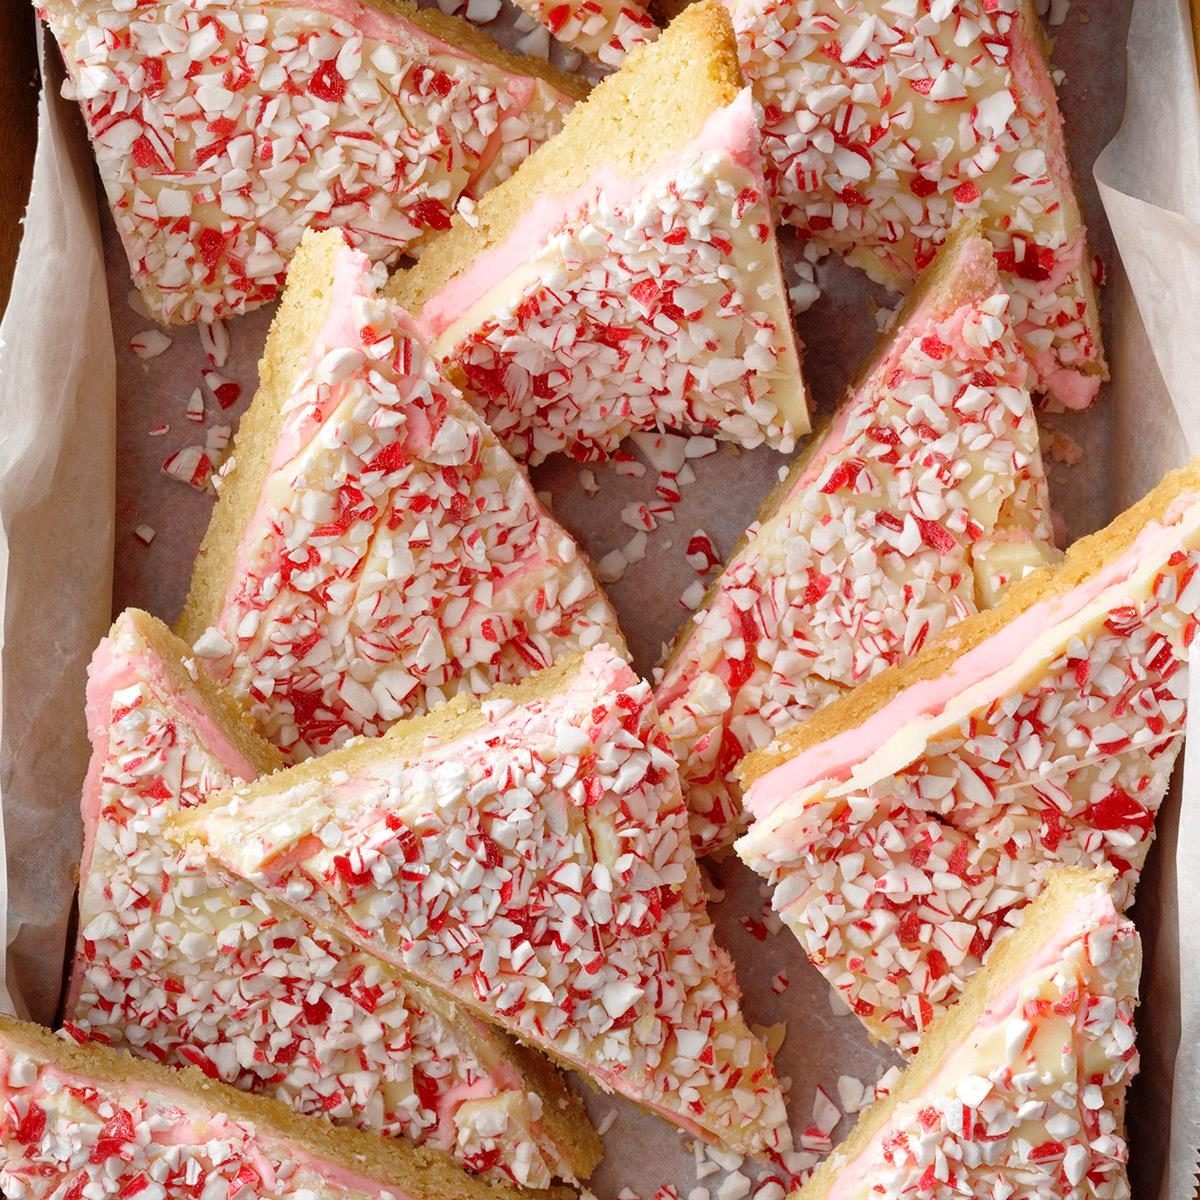 Candy Cane Shortbread Bars Exps Hca23 181621 P2 Md 12 01 2b